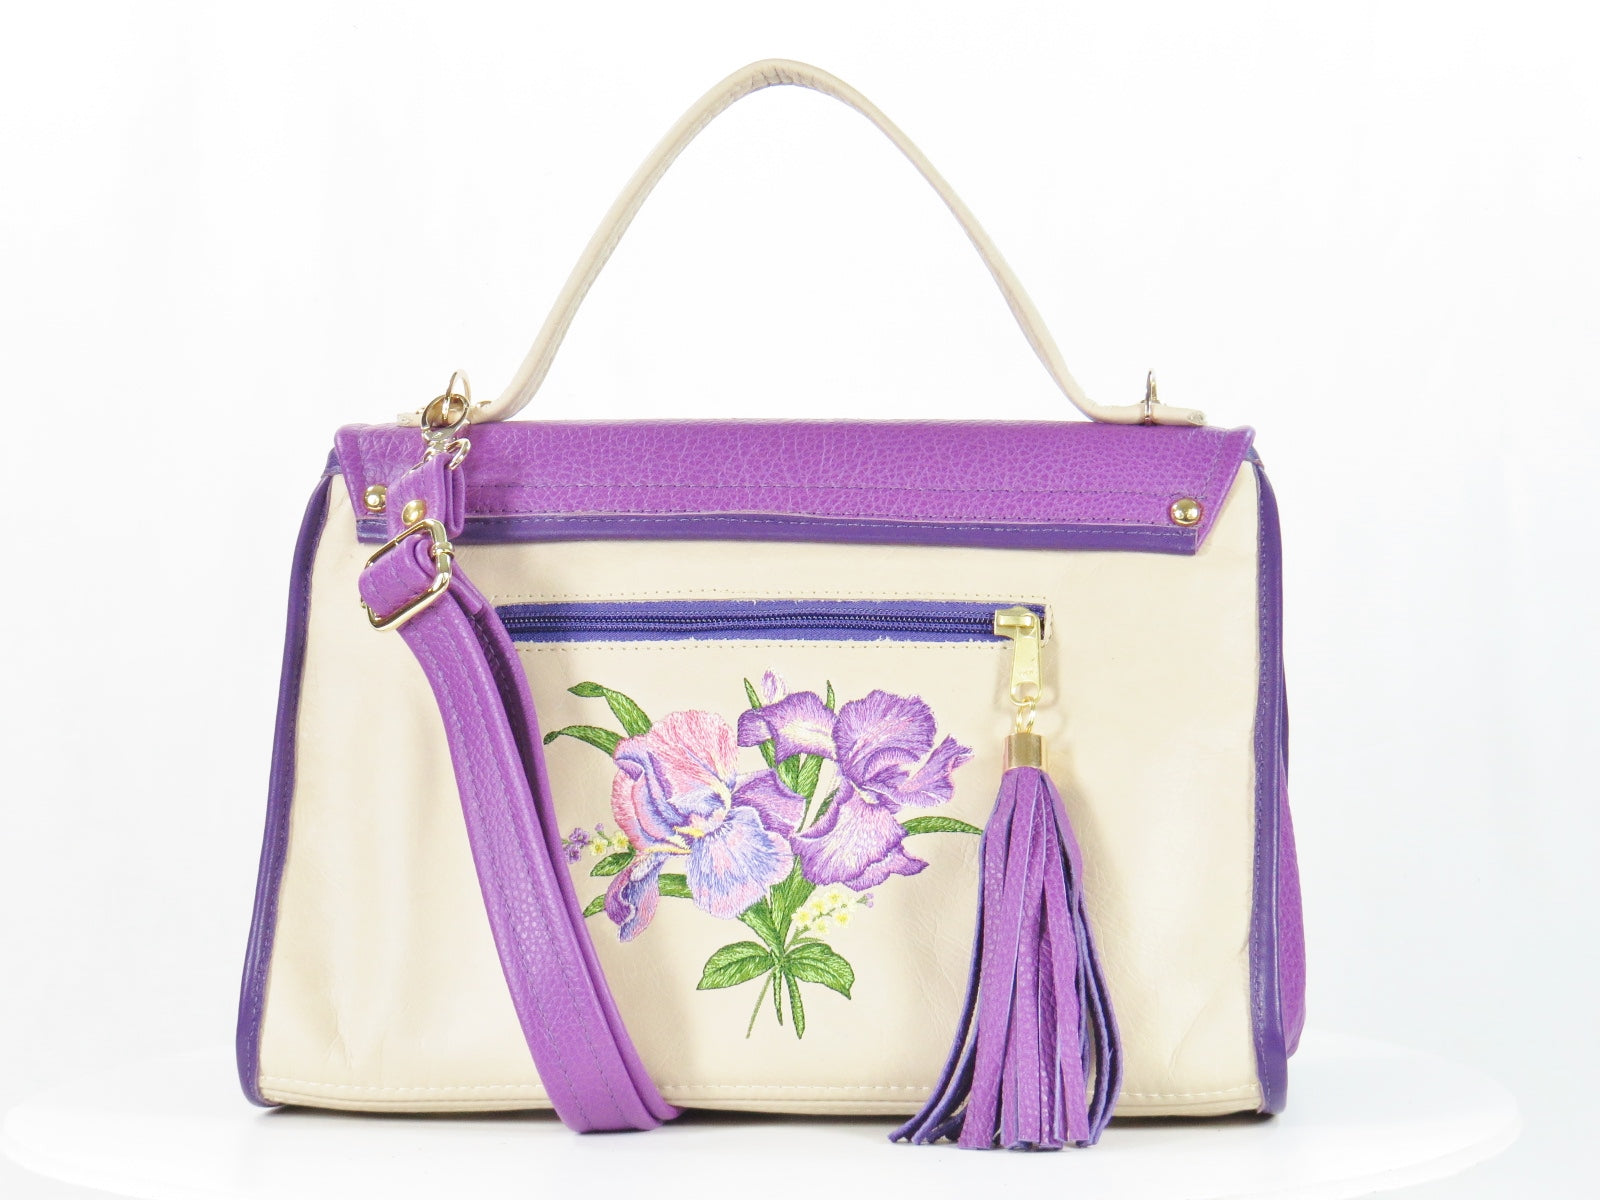 Embroidered Irises  Purple and Beige Leather Purse back side